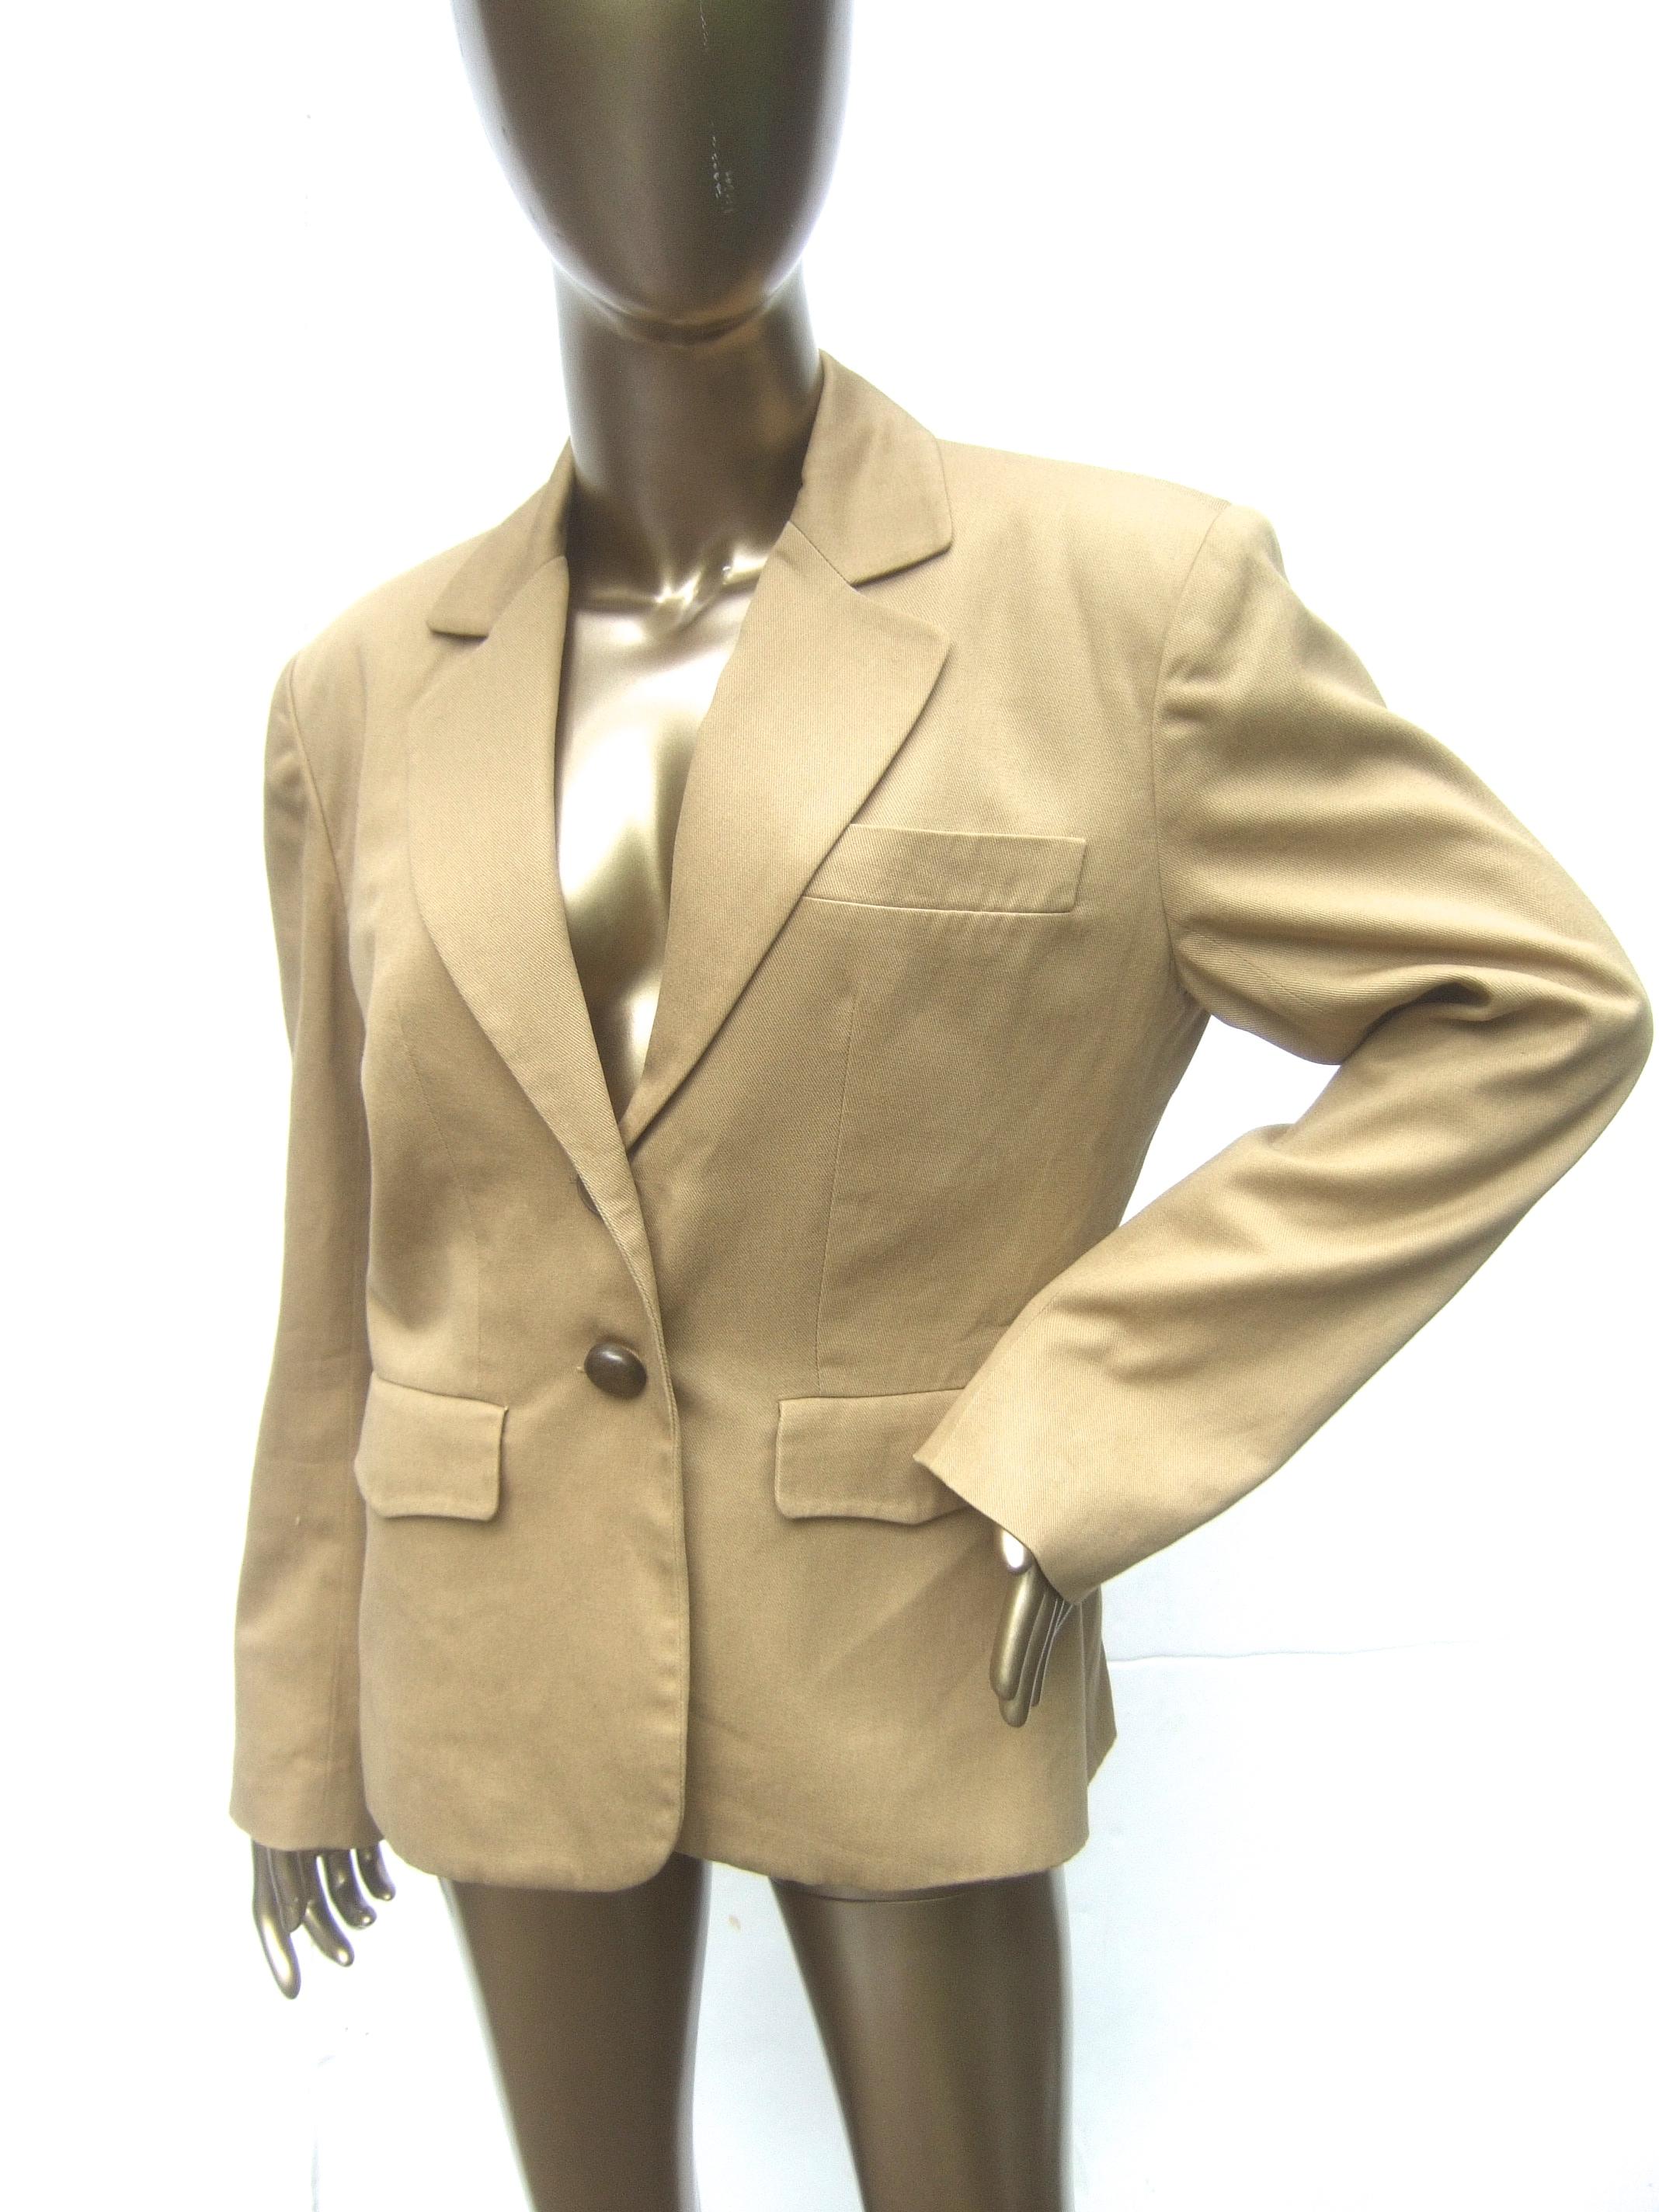 Hermes Paris Khaki cotton blend women's jacket Size 42 
The classic cotton blend jacket is designed with a single chest pocket & a pair of flap covered pockets on the lower front 

Adorned with a pair of burnished brass tone metal buttons on the